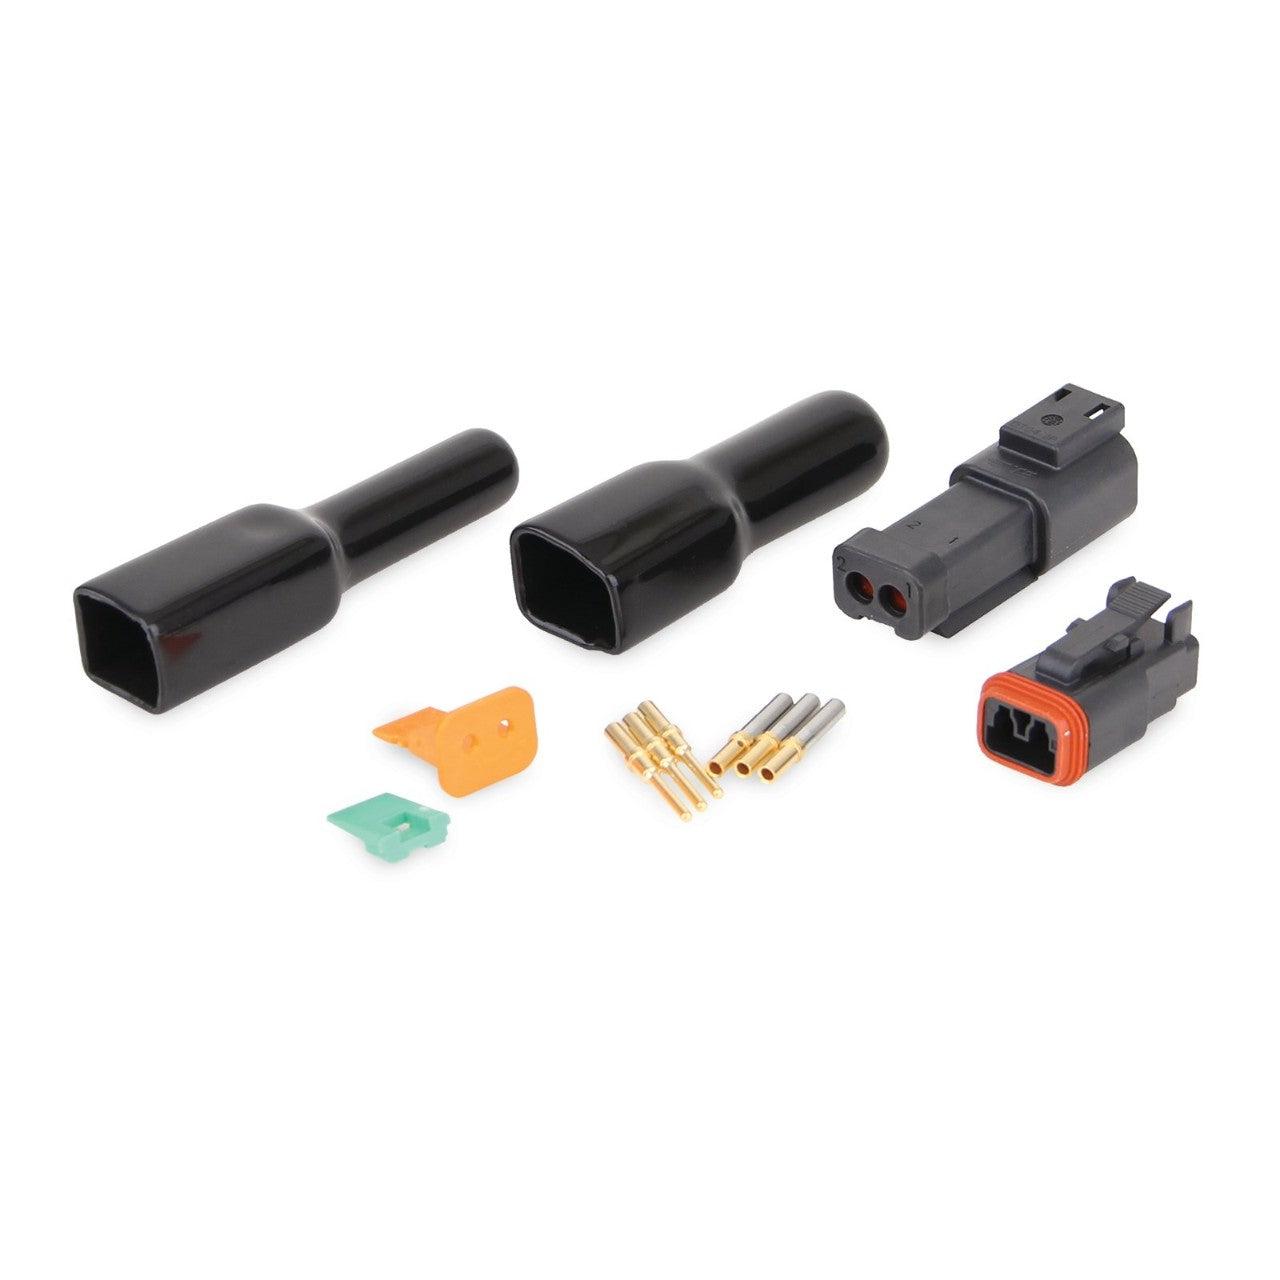 2 PIN DT Connector Kit to Connect 2 Wires, Includes Housing and Connector Receptacle, (3) Gold 16-20 AWG Sockets, (3) Gold 16-20 AWG Pins and Boots